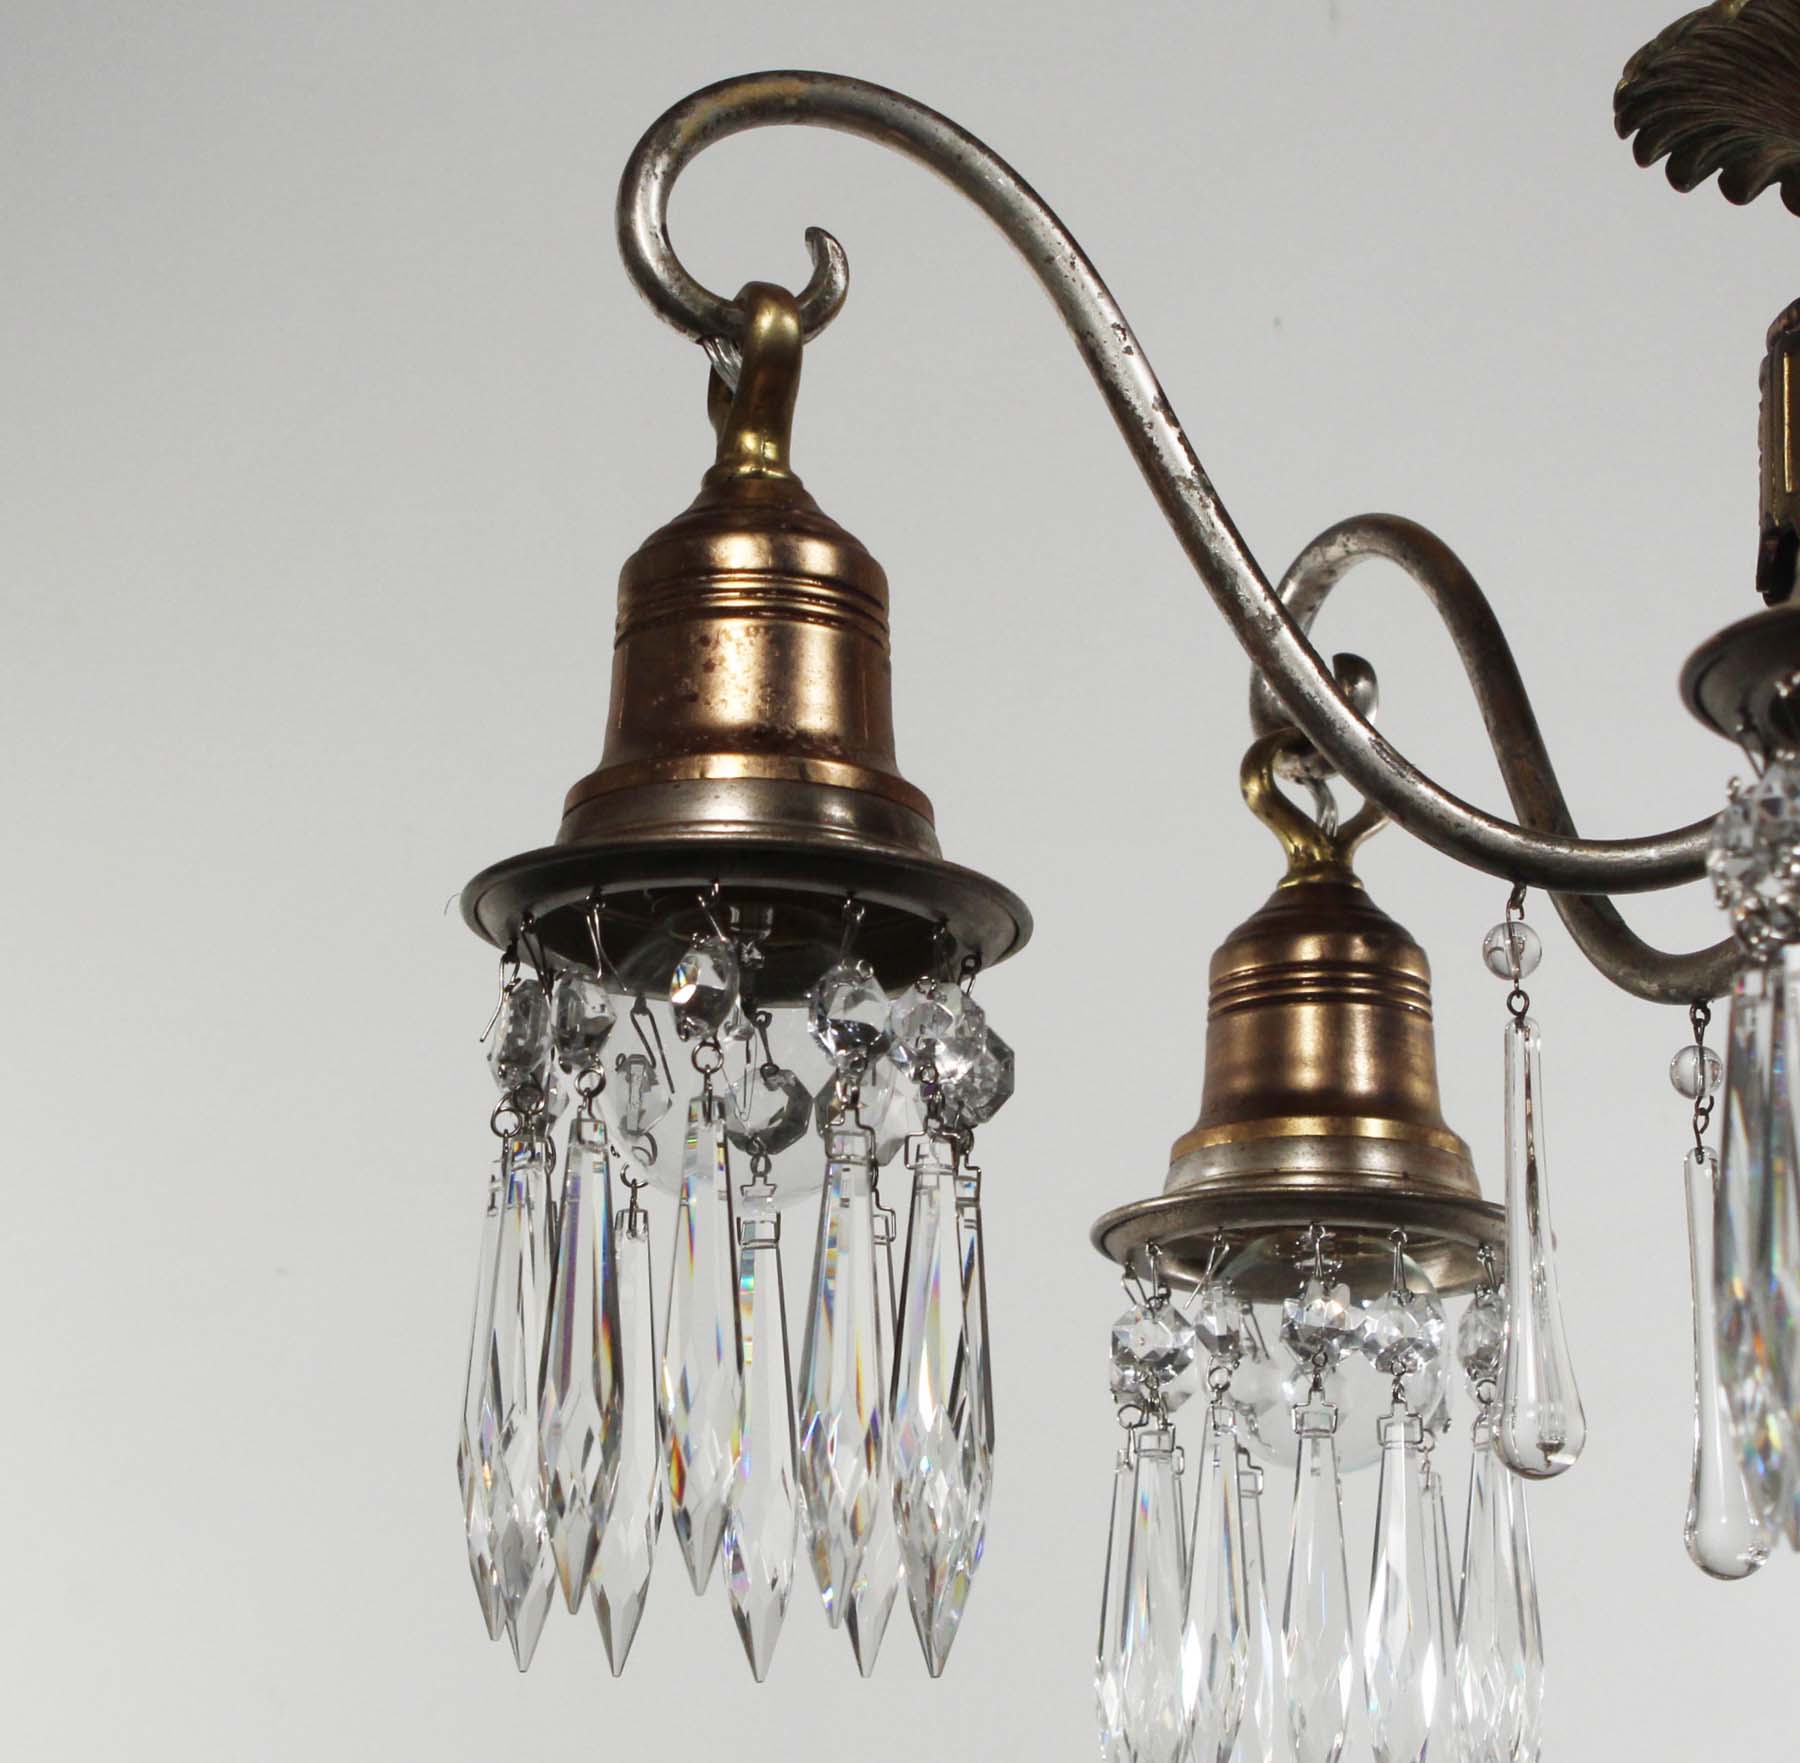 SOLD Neoclassical Chandelier with Prisms, Antique Lighting-68399